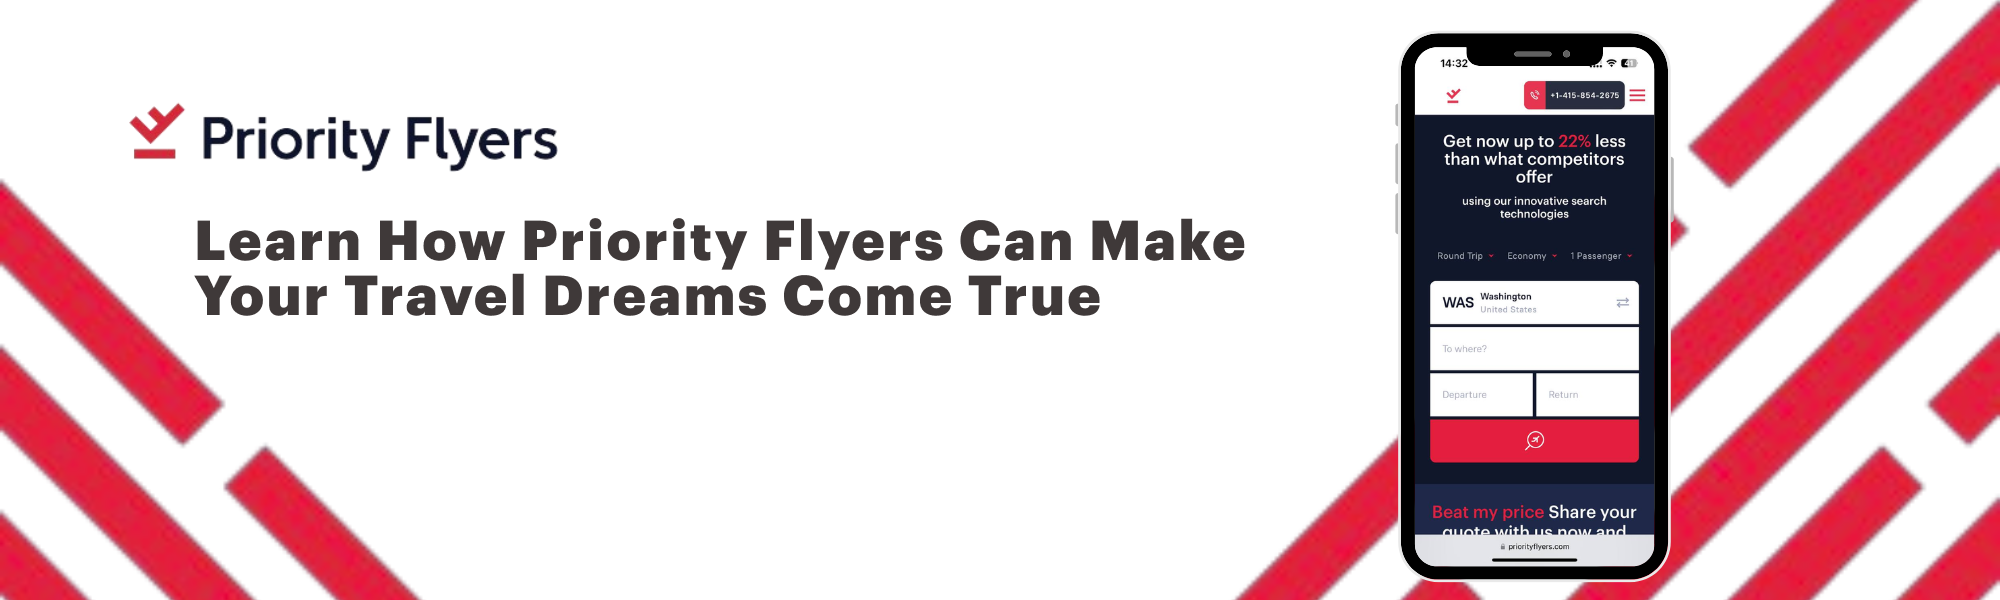 Learn How Priority Flyers Can Make Your Travel Dreams Come True